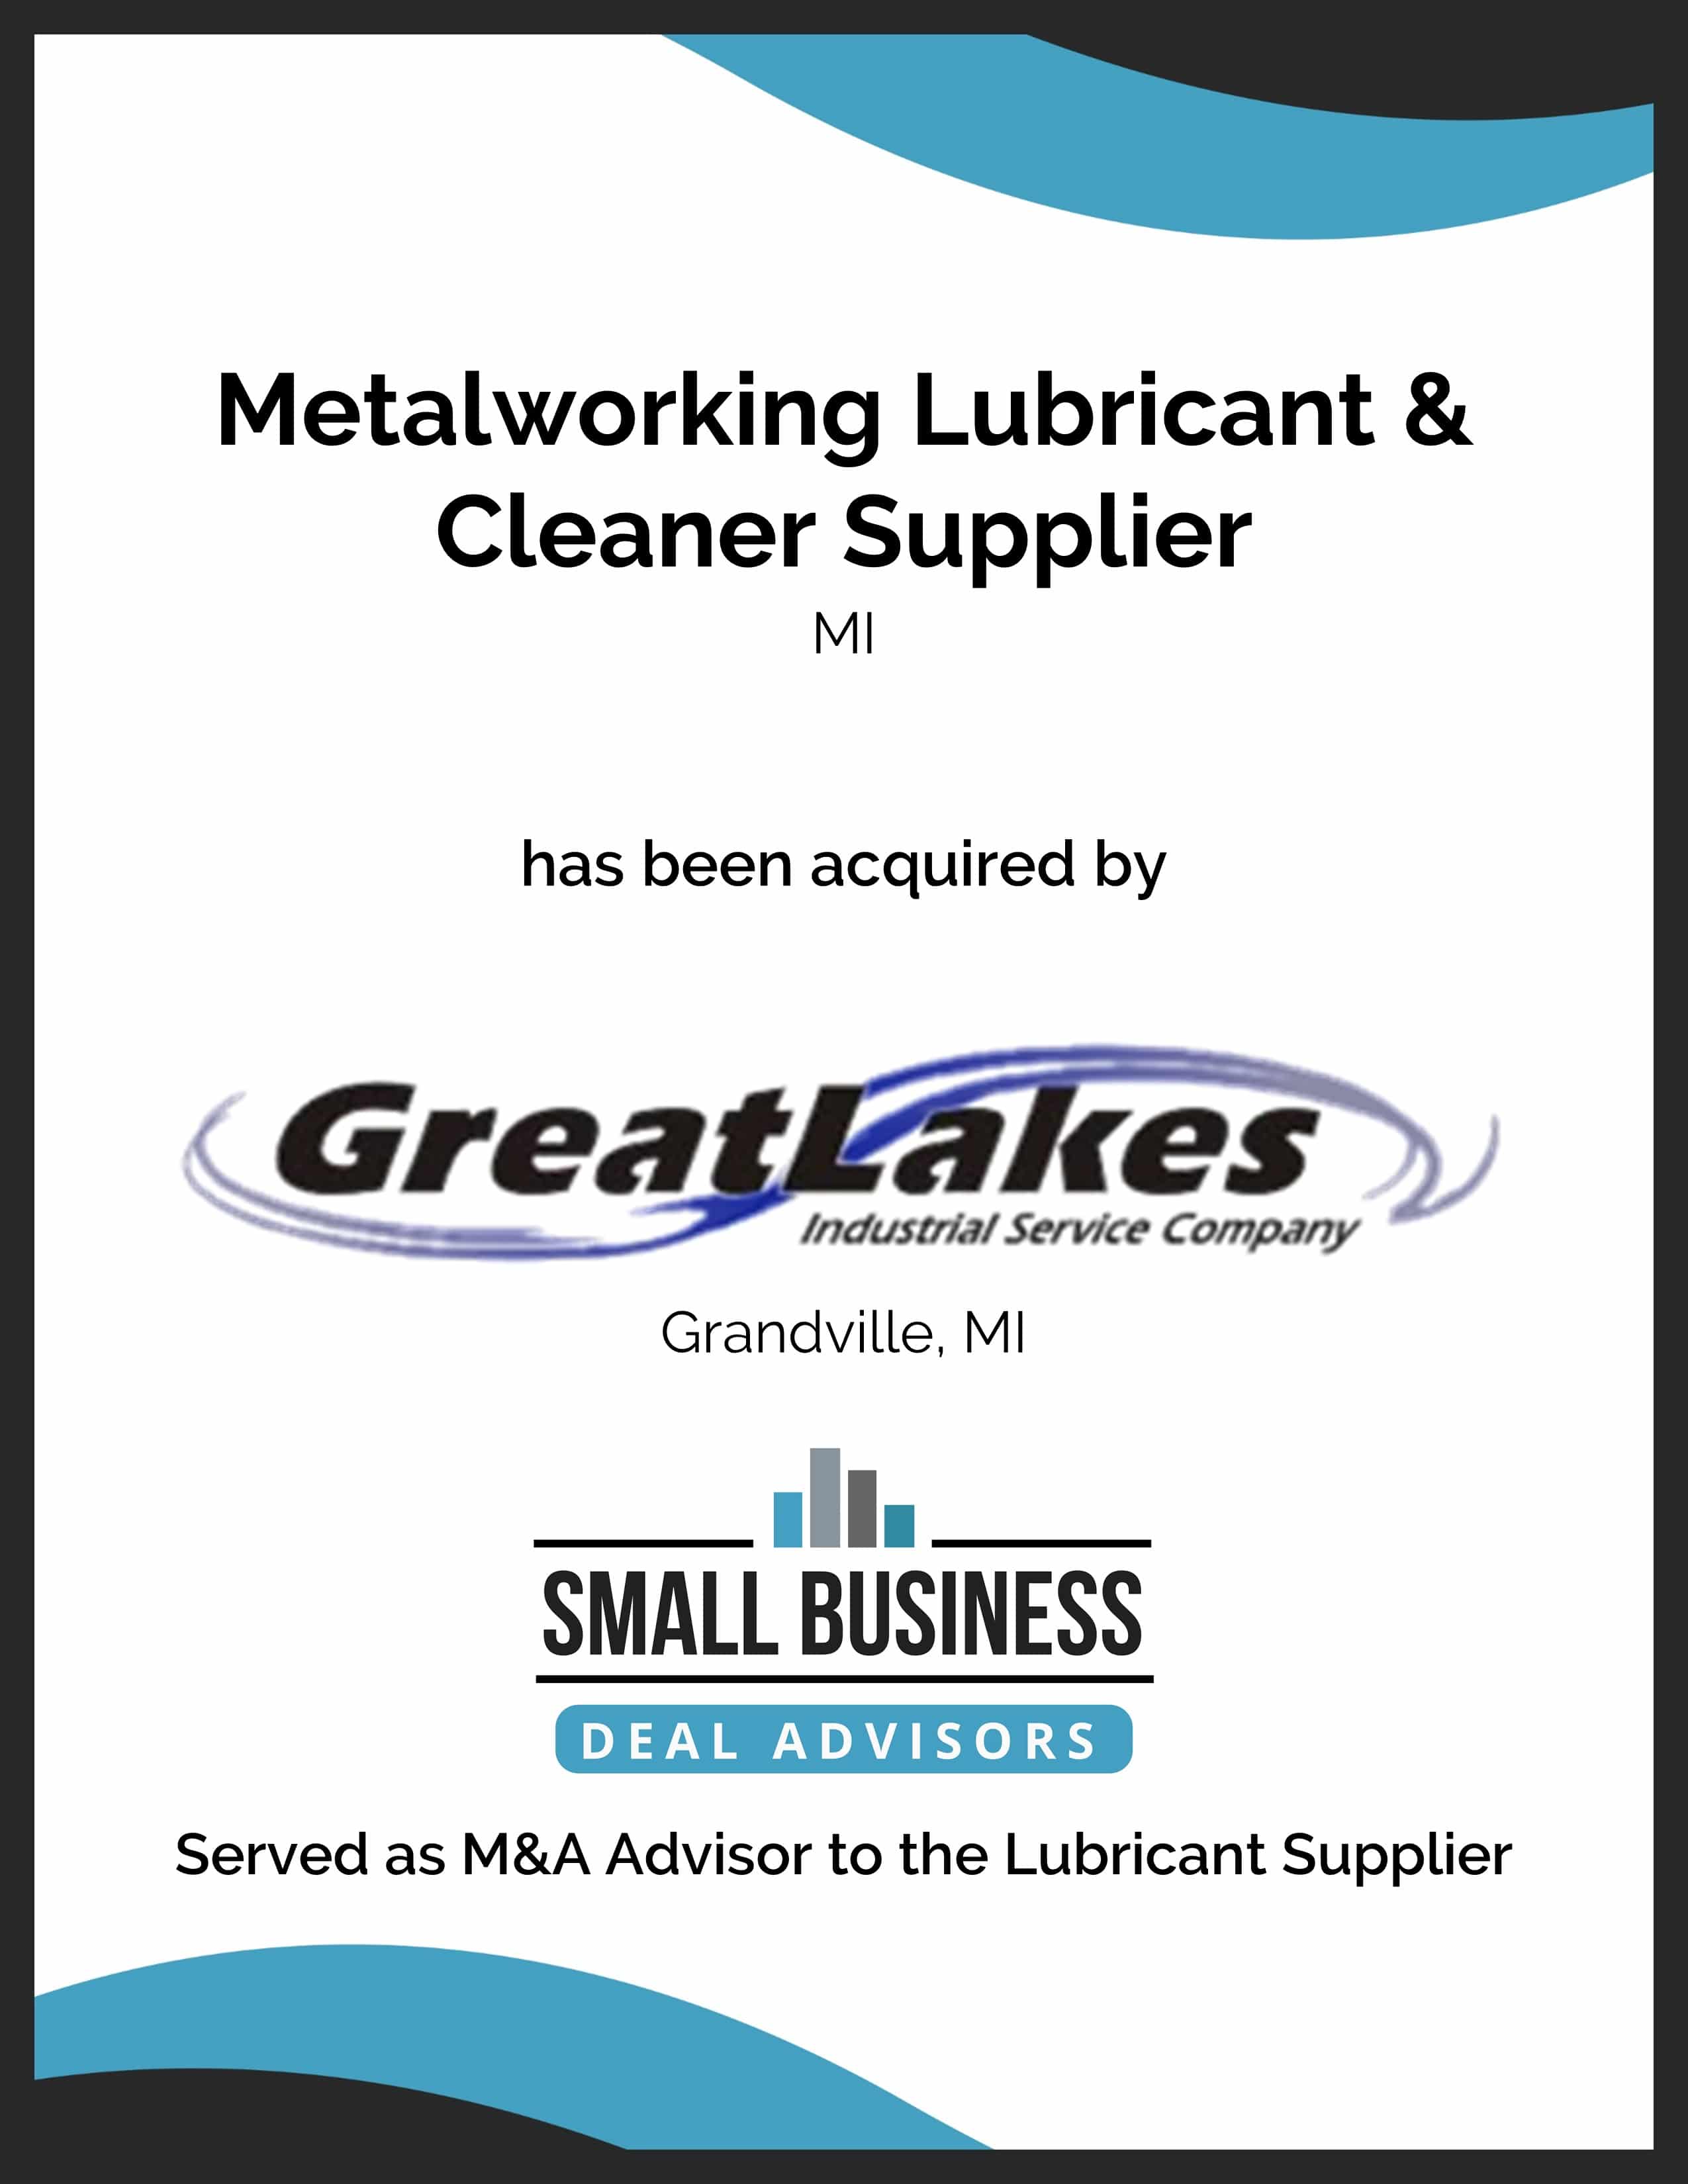 Great Lakes Industrial Services Invests in Metalworking Supplier